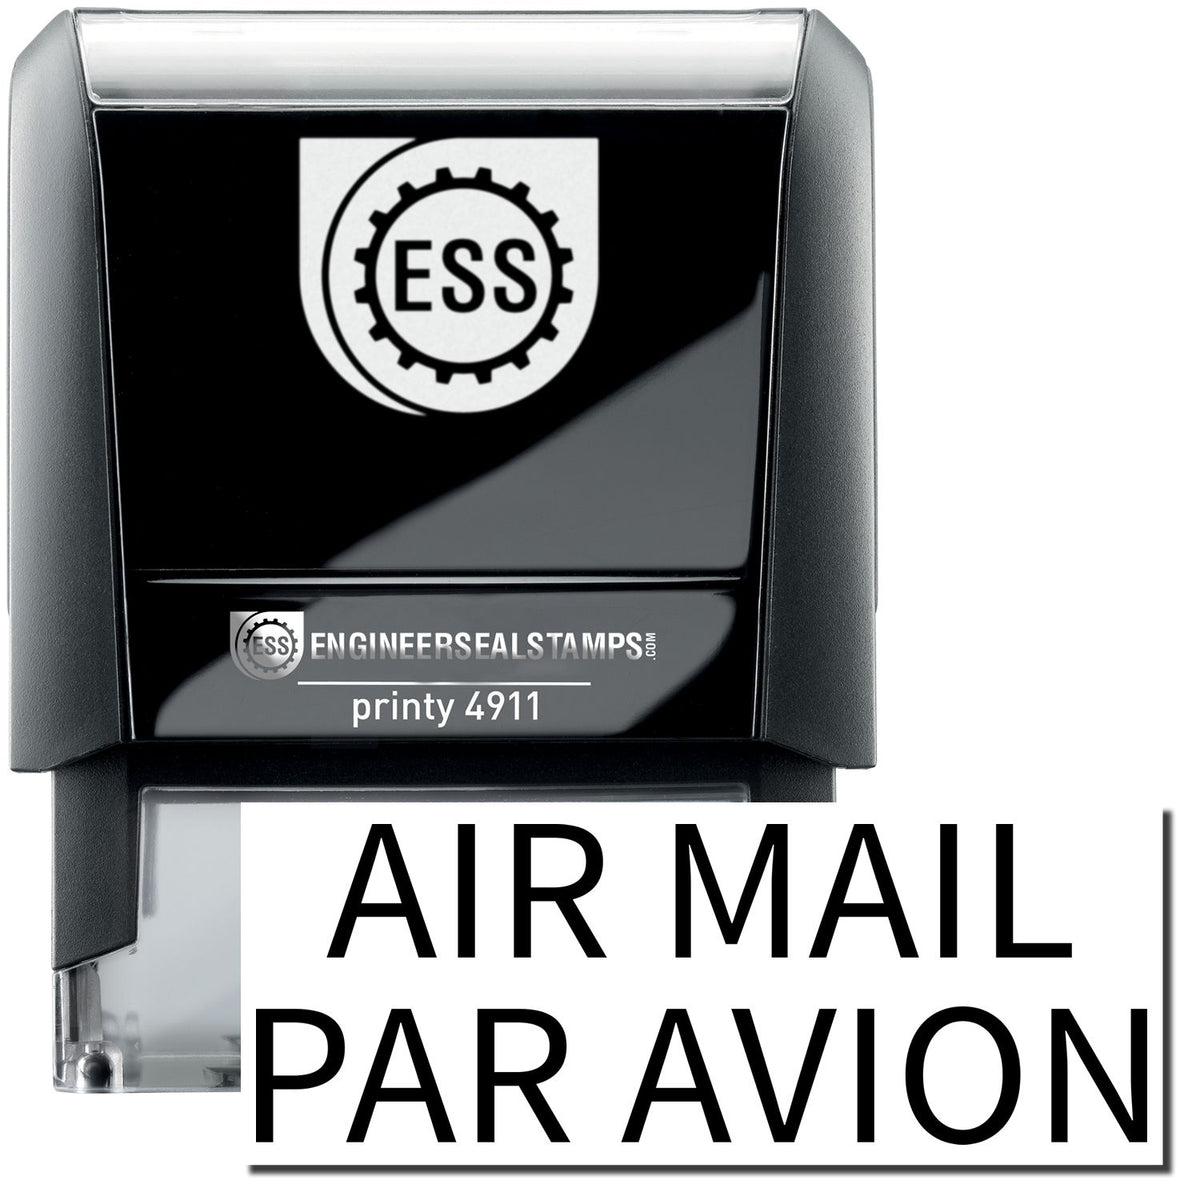 A self-inking stamp with a stamped image showing how the text &quot;AIR MAIL PAR AVION&quot; is displayed after stamping.